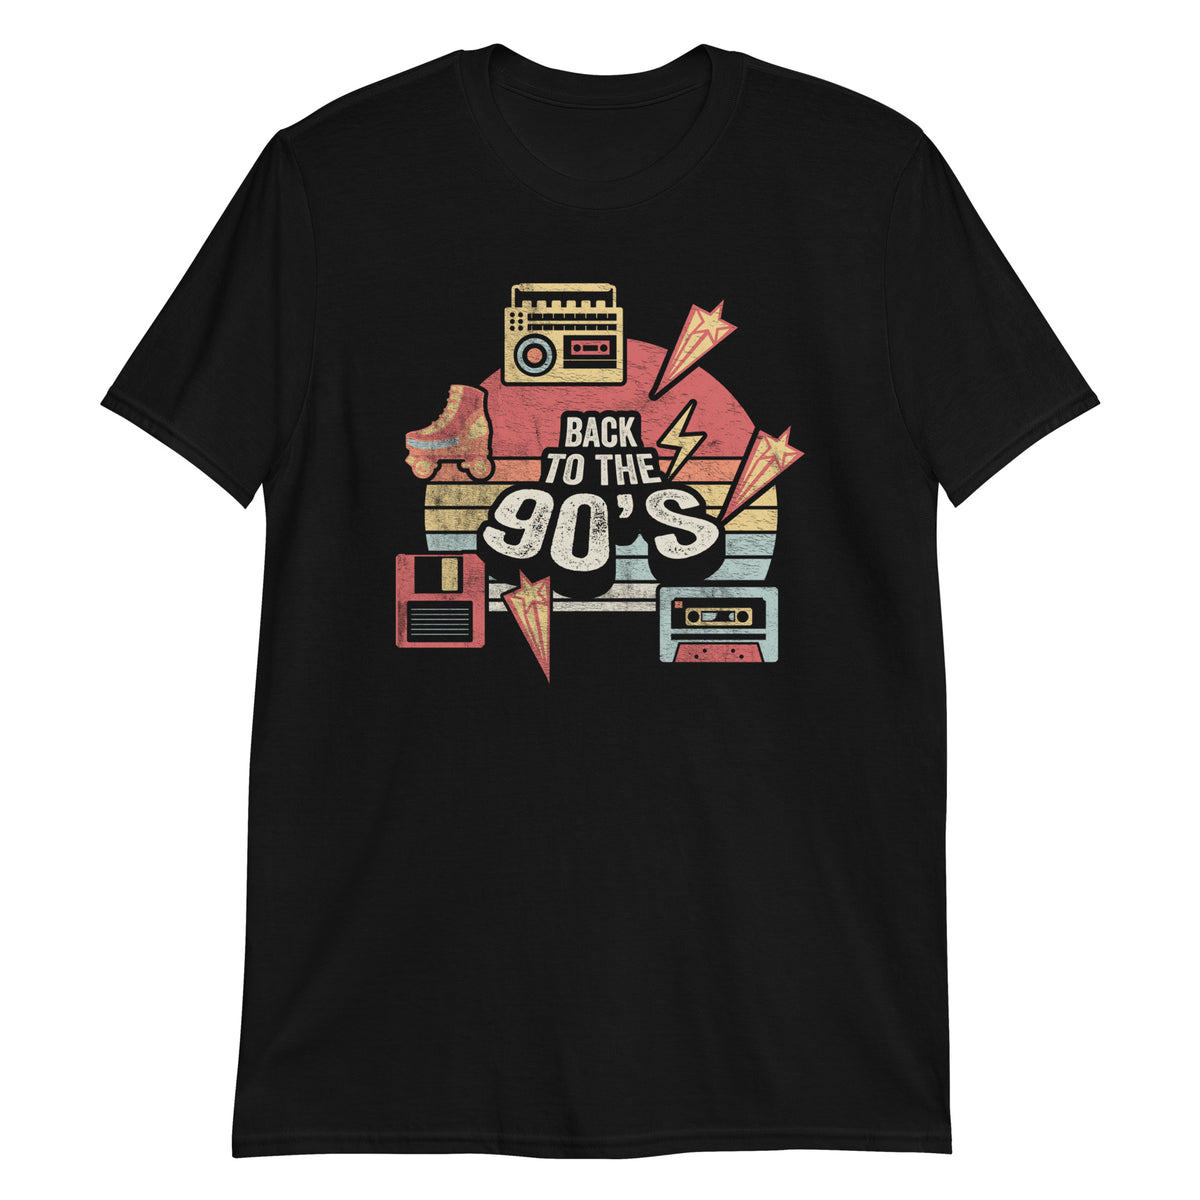 Back to The 90s T-Shirt